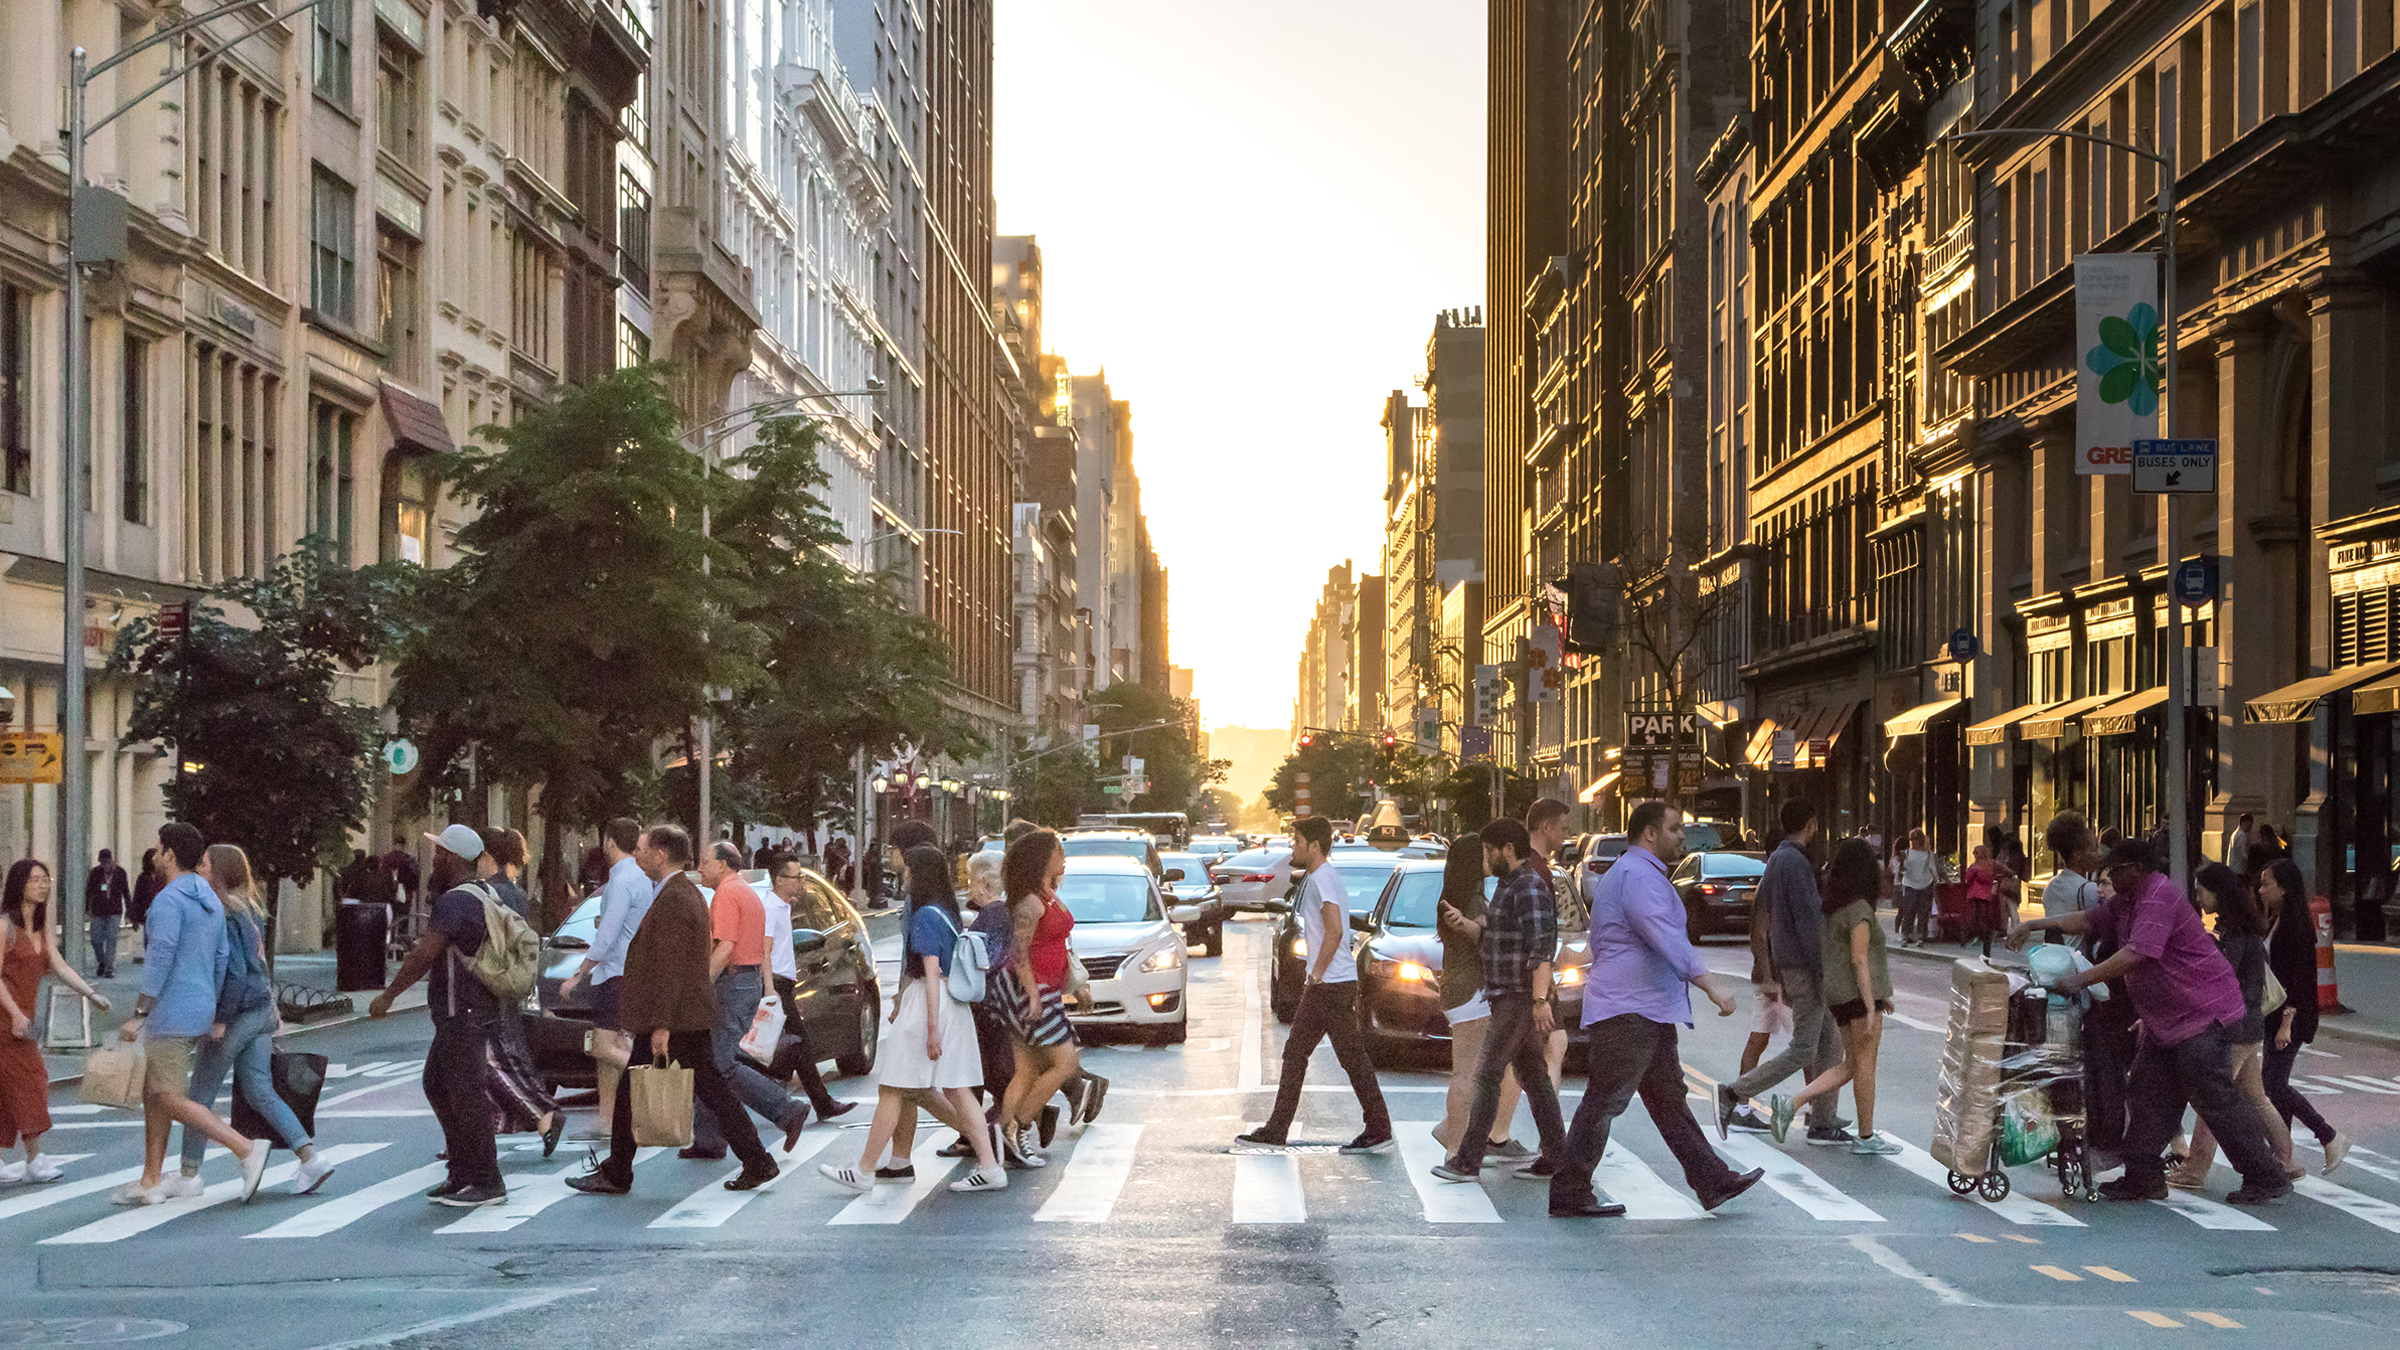 New York street with a crowd of people crossing